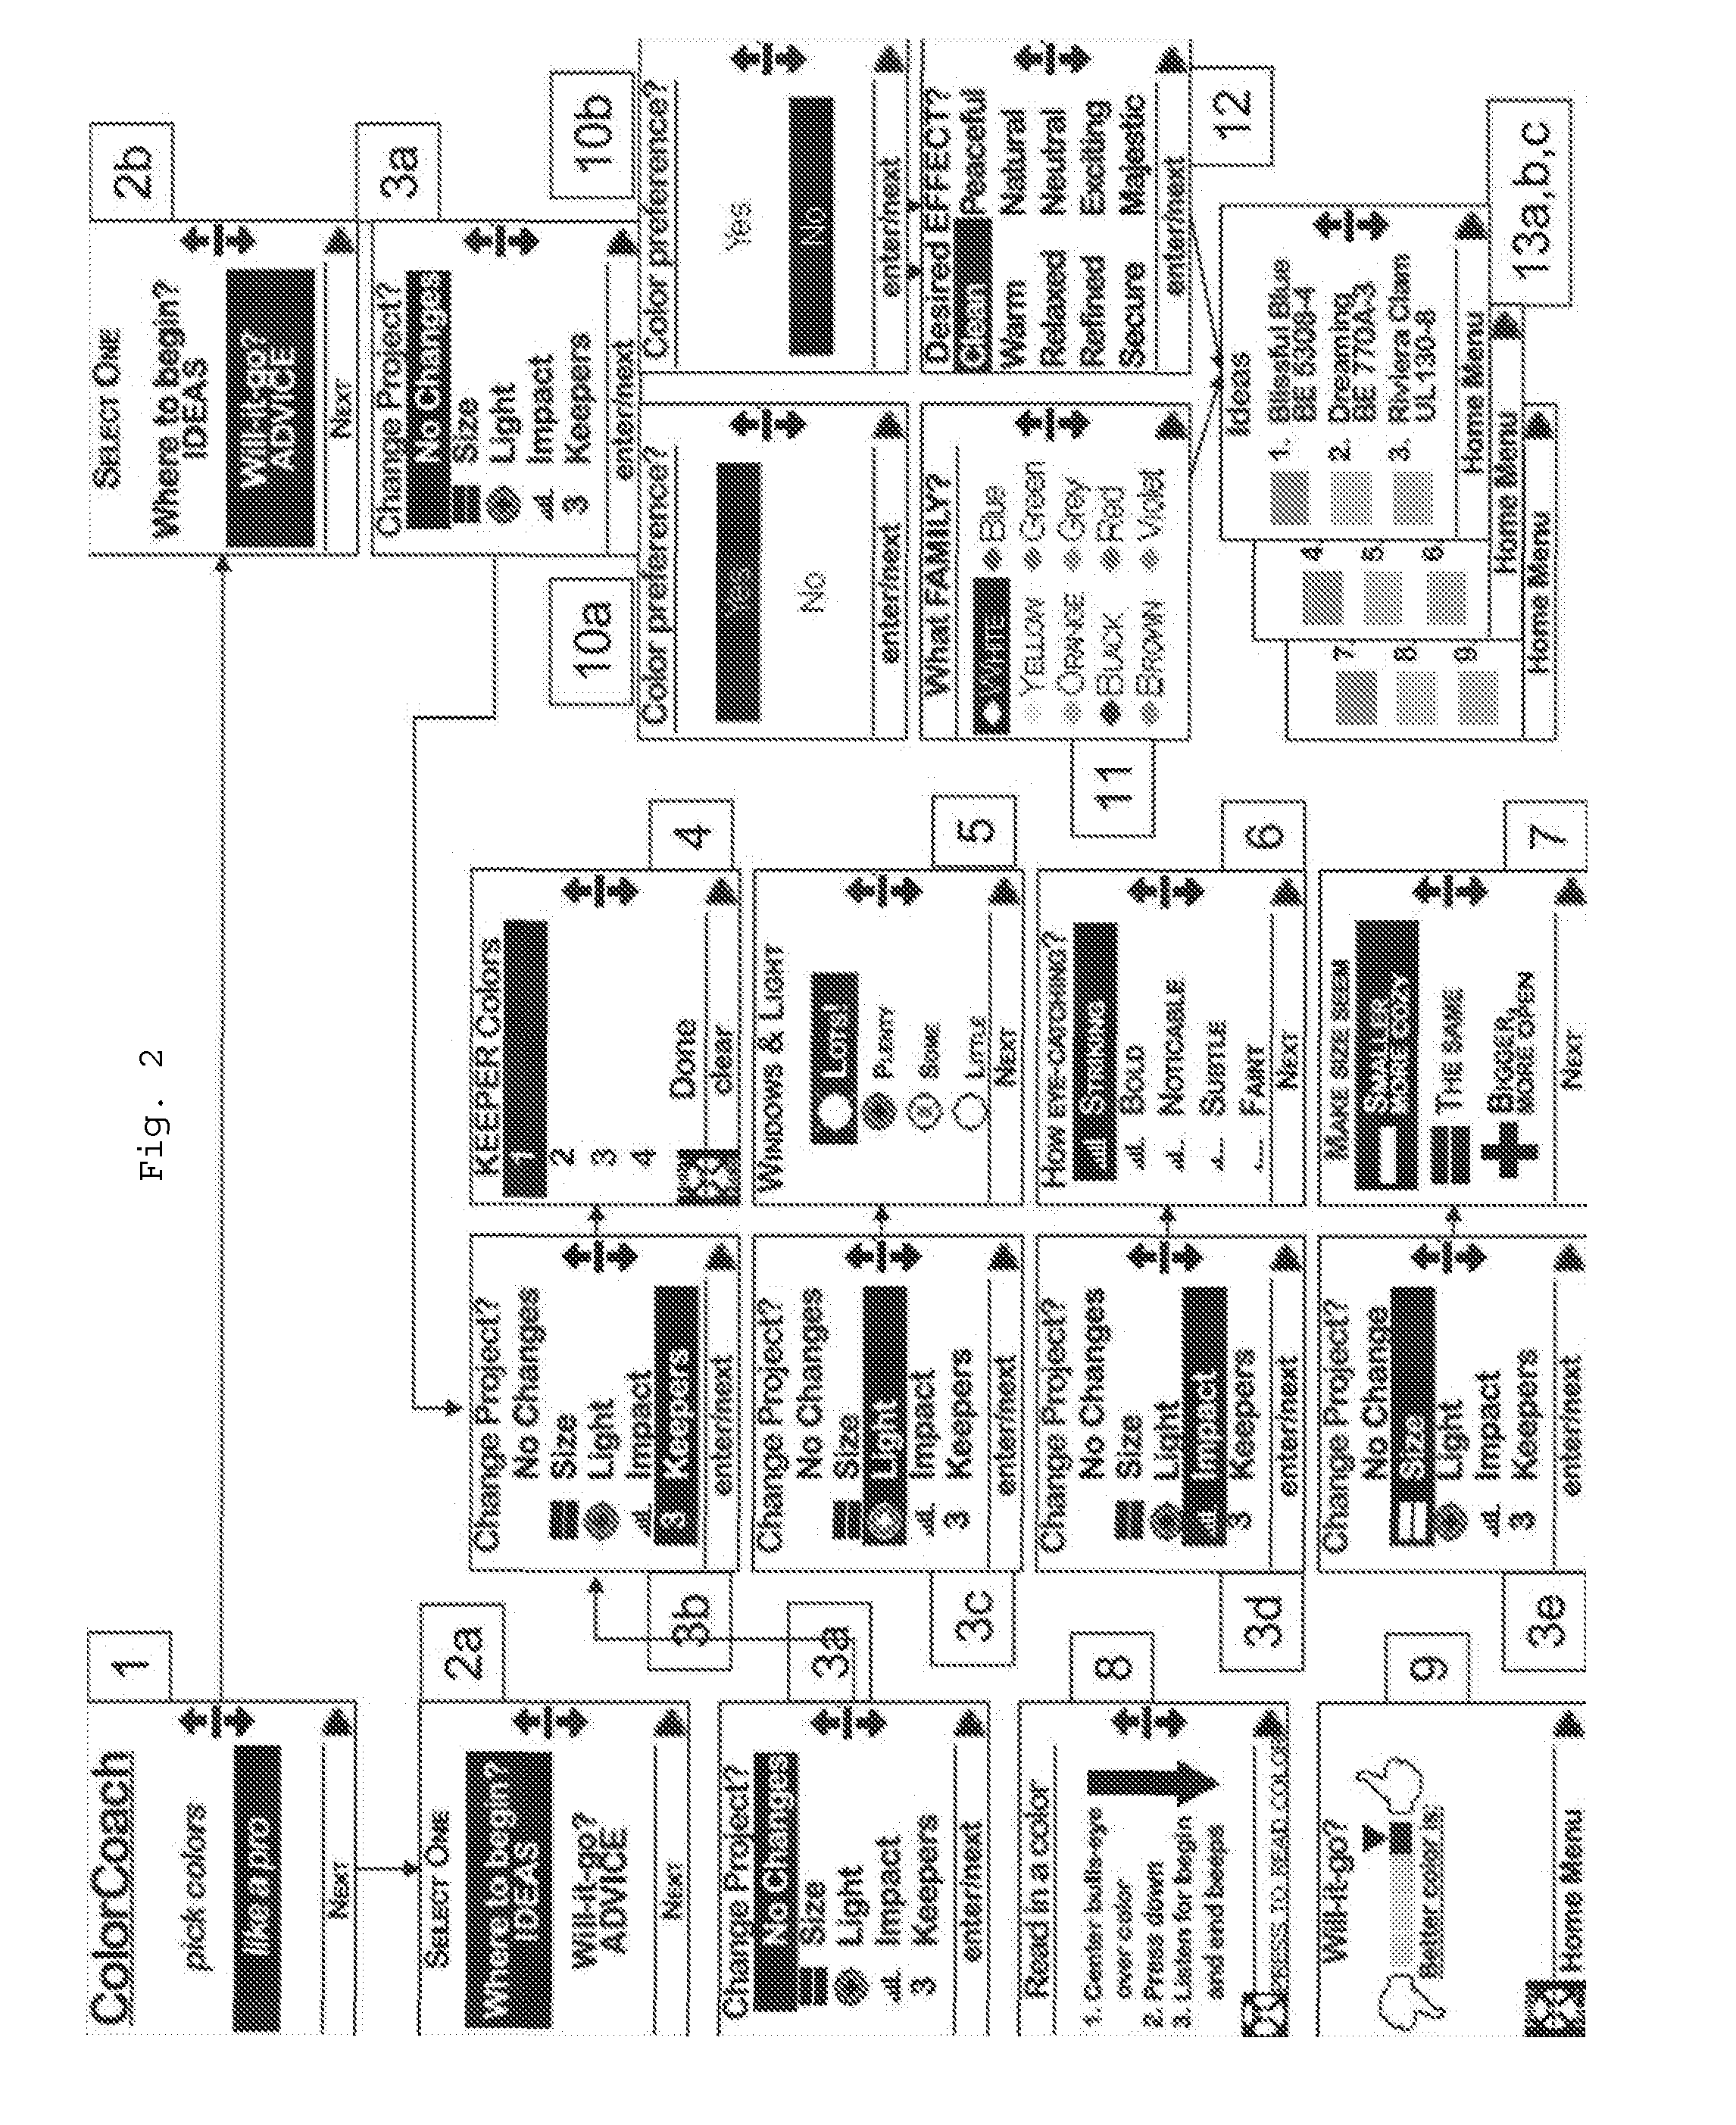 System and method for defining target color specifications